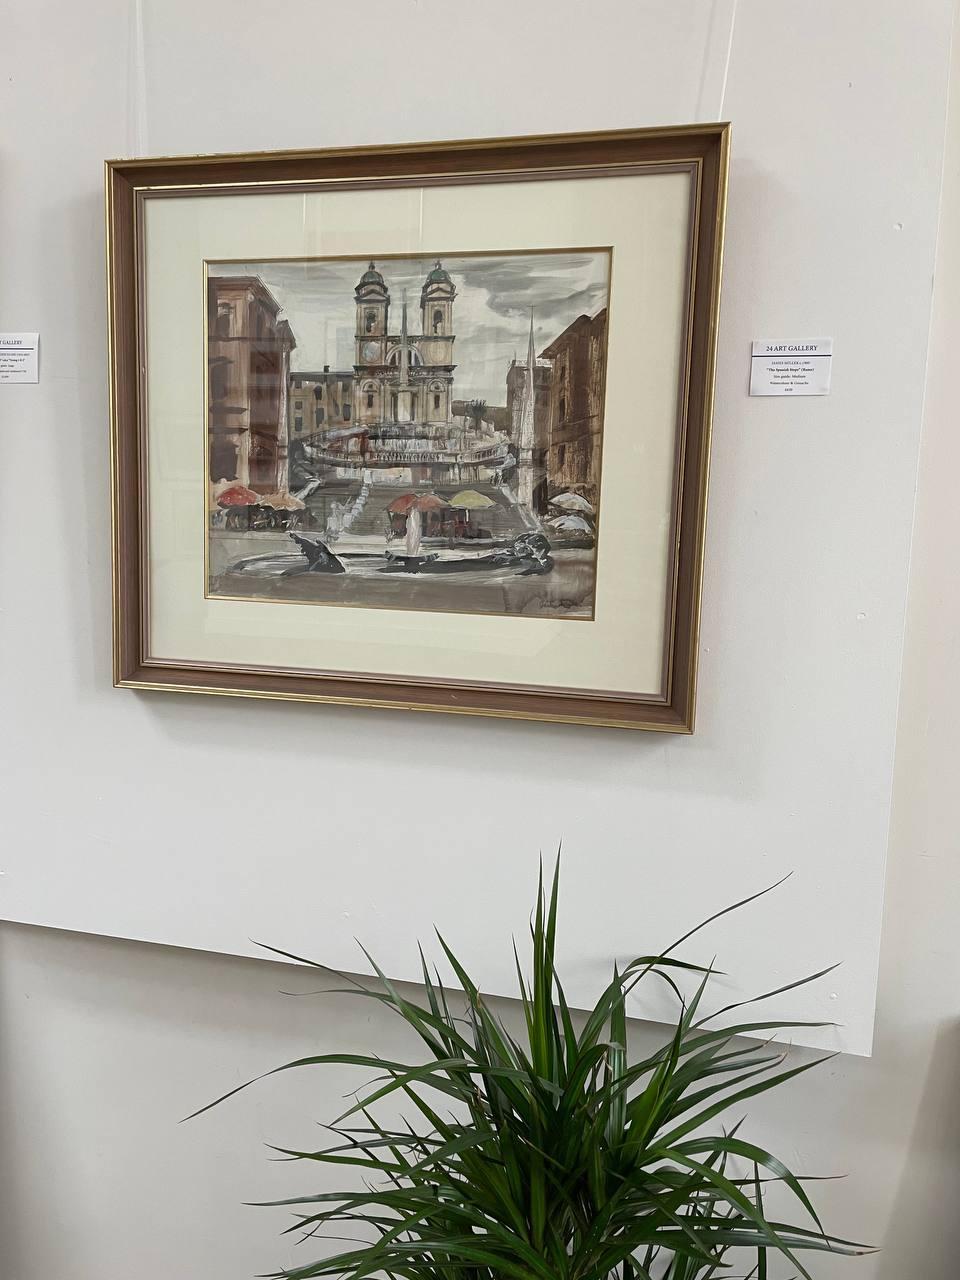 Scottish painter, best known for his watercolours of European cities, captured on the spot. A retrospective exhibition of his work, entitled “A Traveller's Eye” was held at the RSA in the winter of 2013-14. In the words of the curator: “Miller's